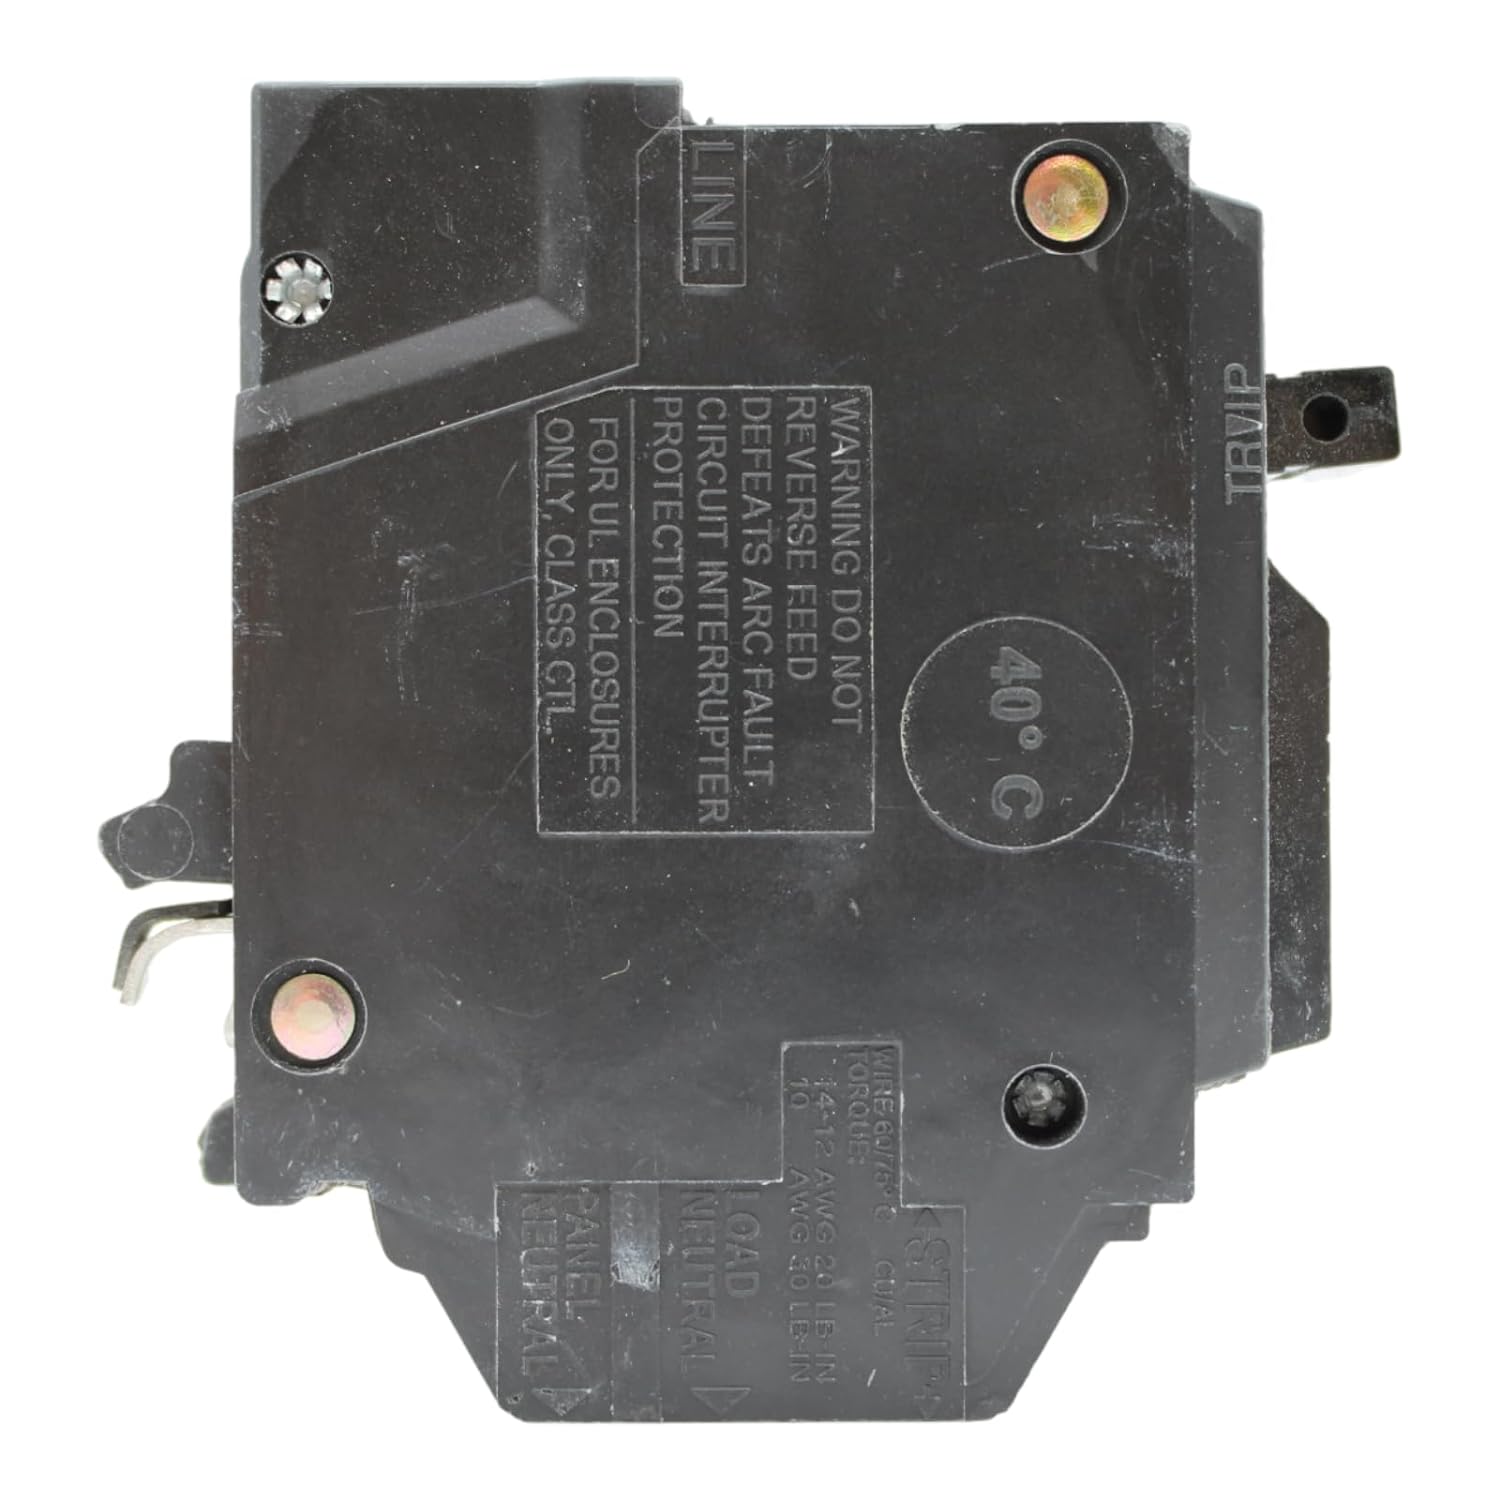 THQL1120PAF2 - General Electrics - Molded Case Circuit Breaker